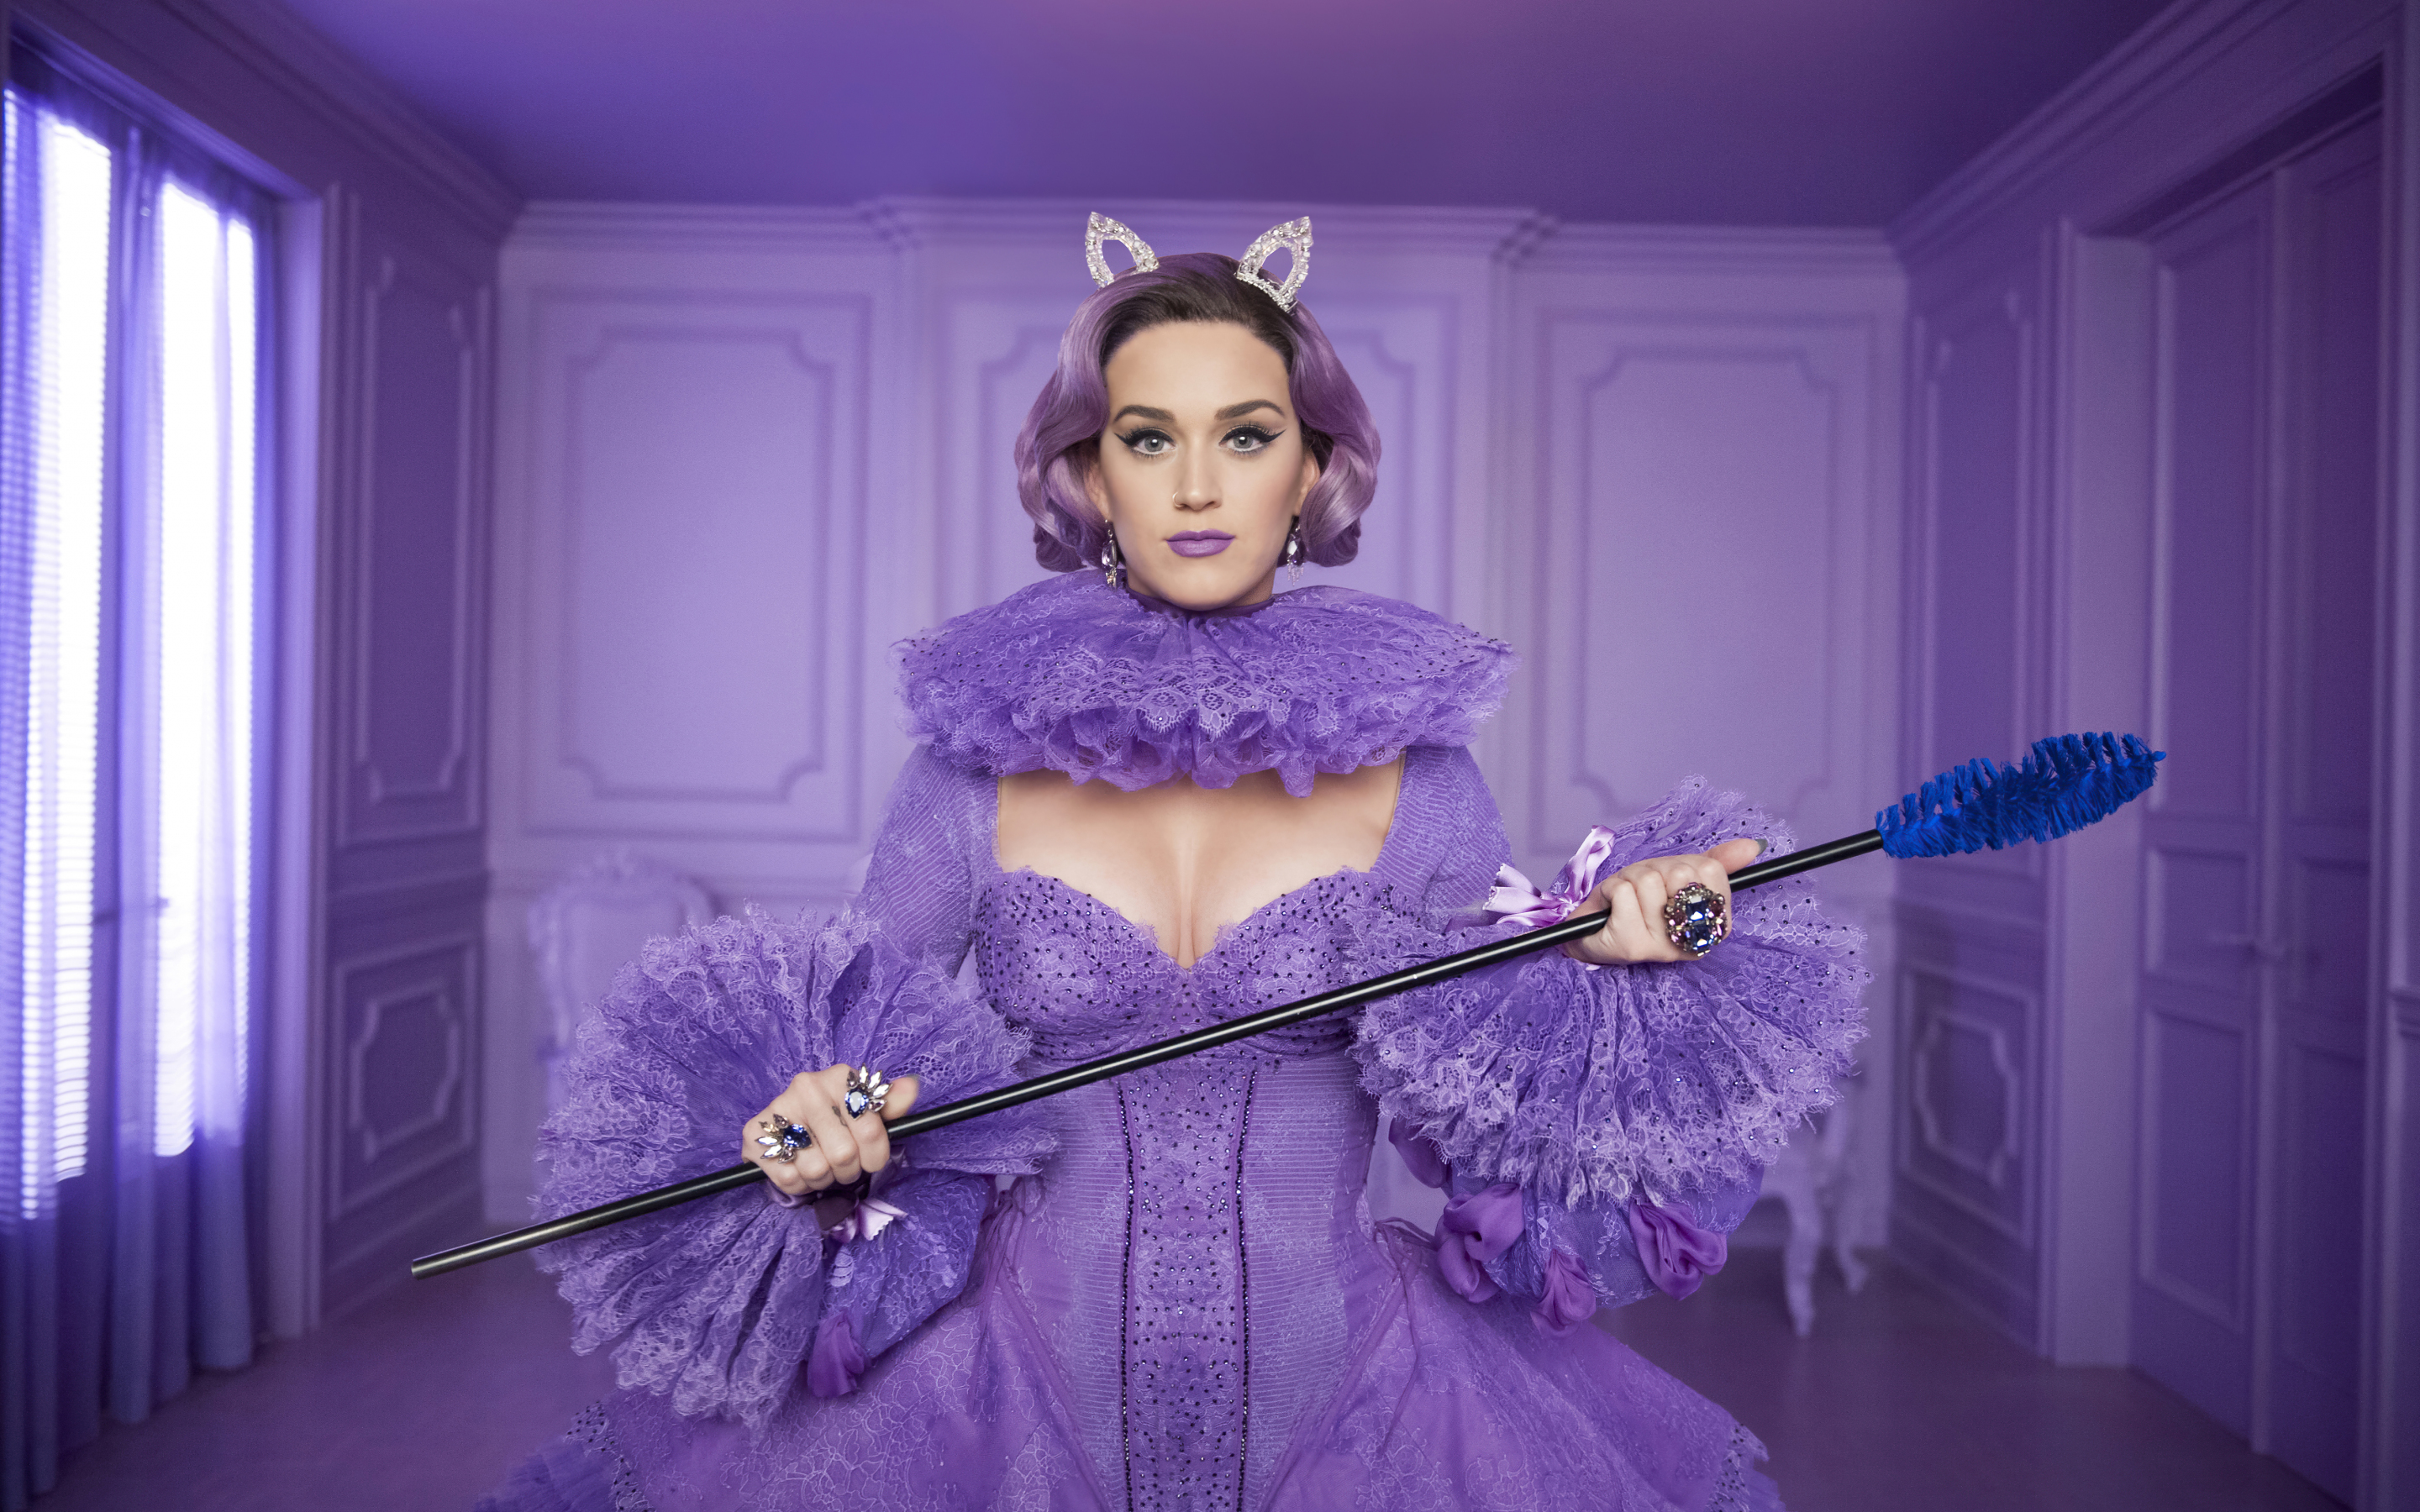 Katy Perry, Cover girl, violet dress, 2021, 2880x1800 wallpaper